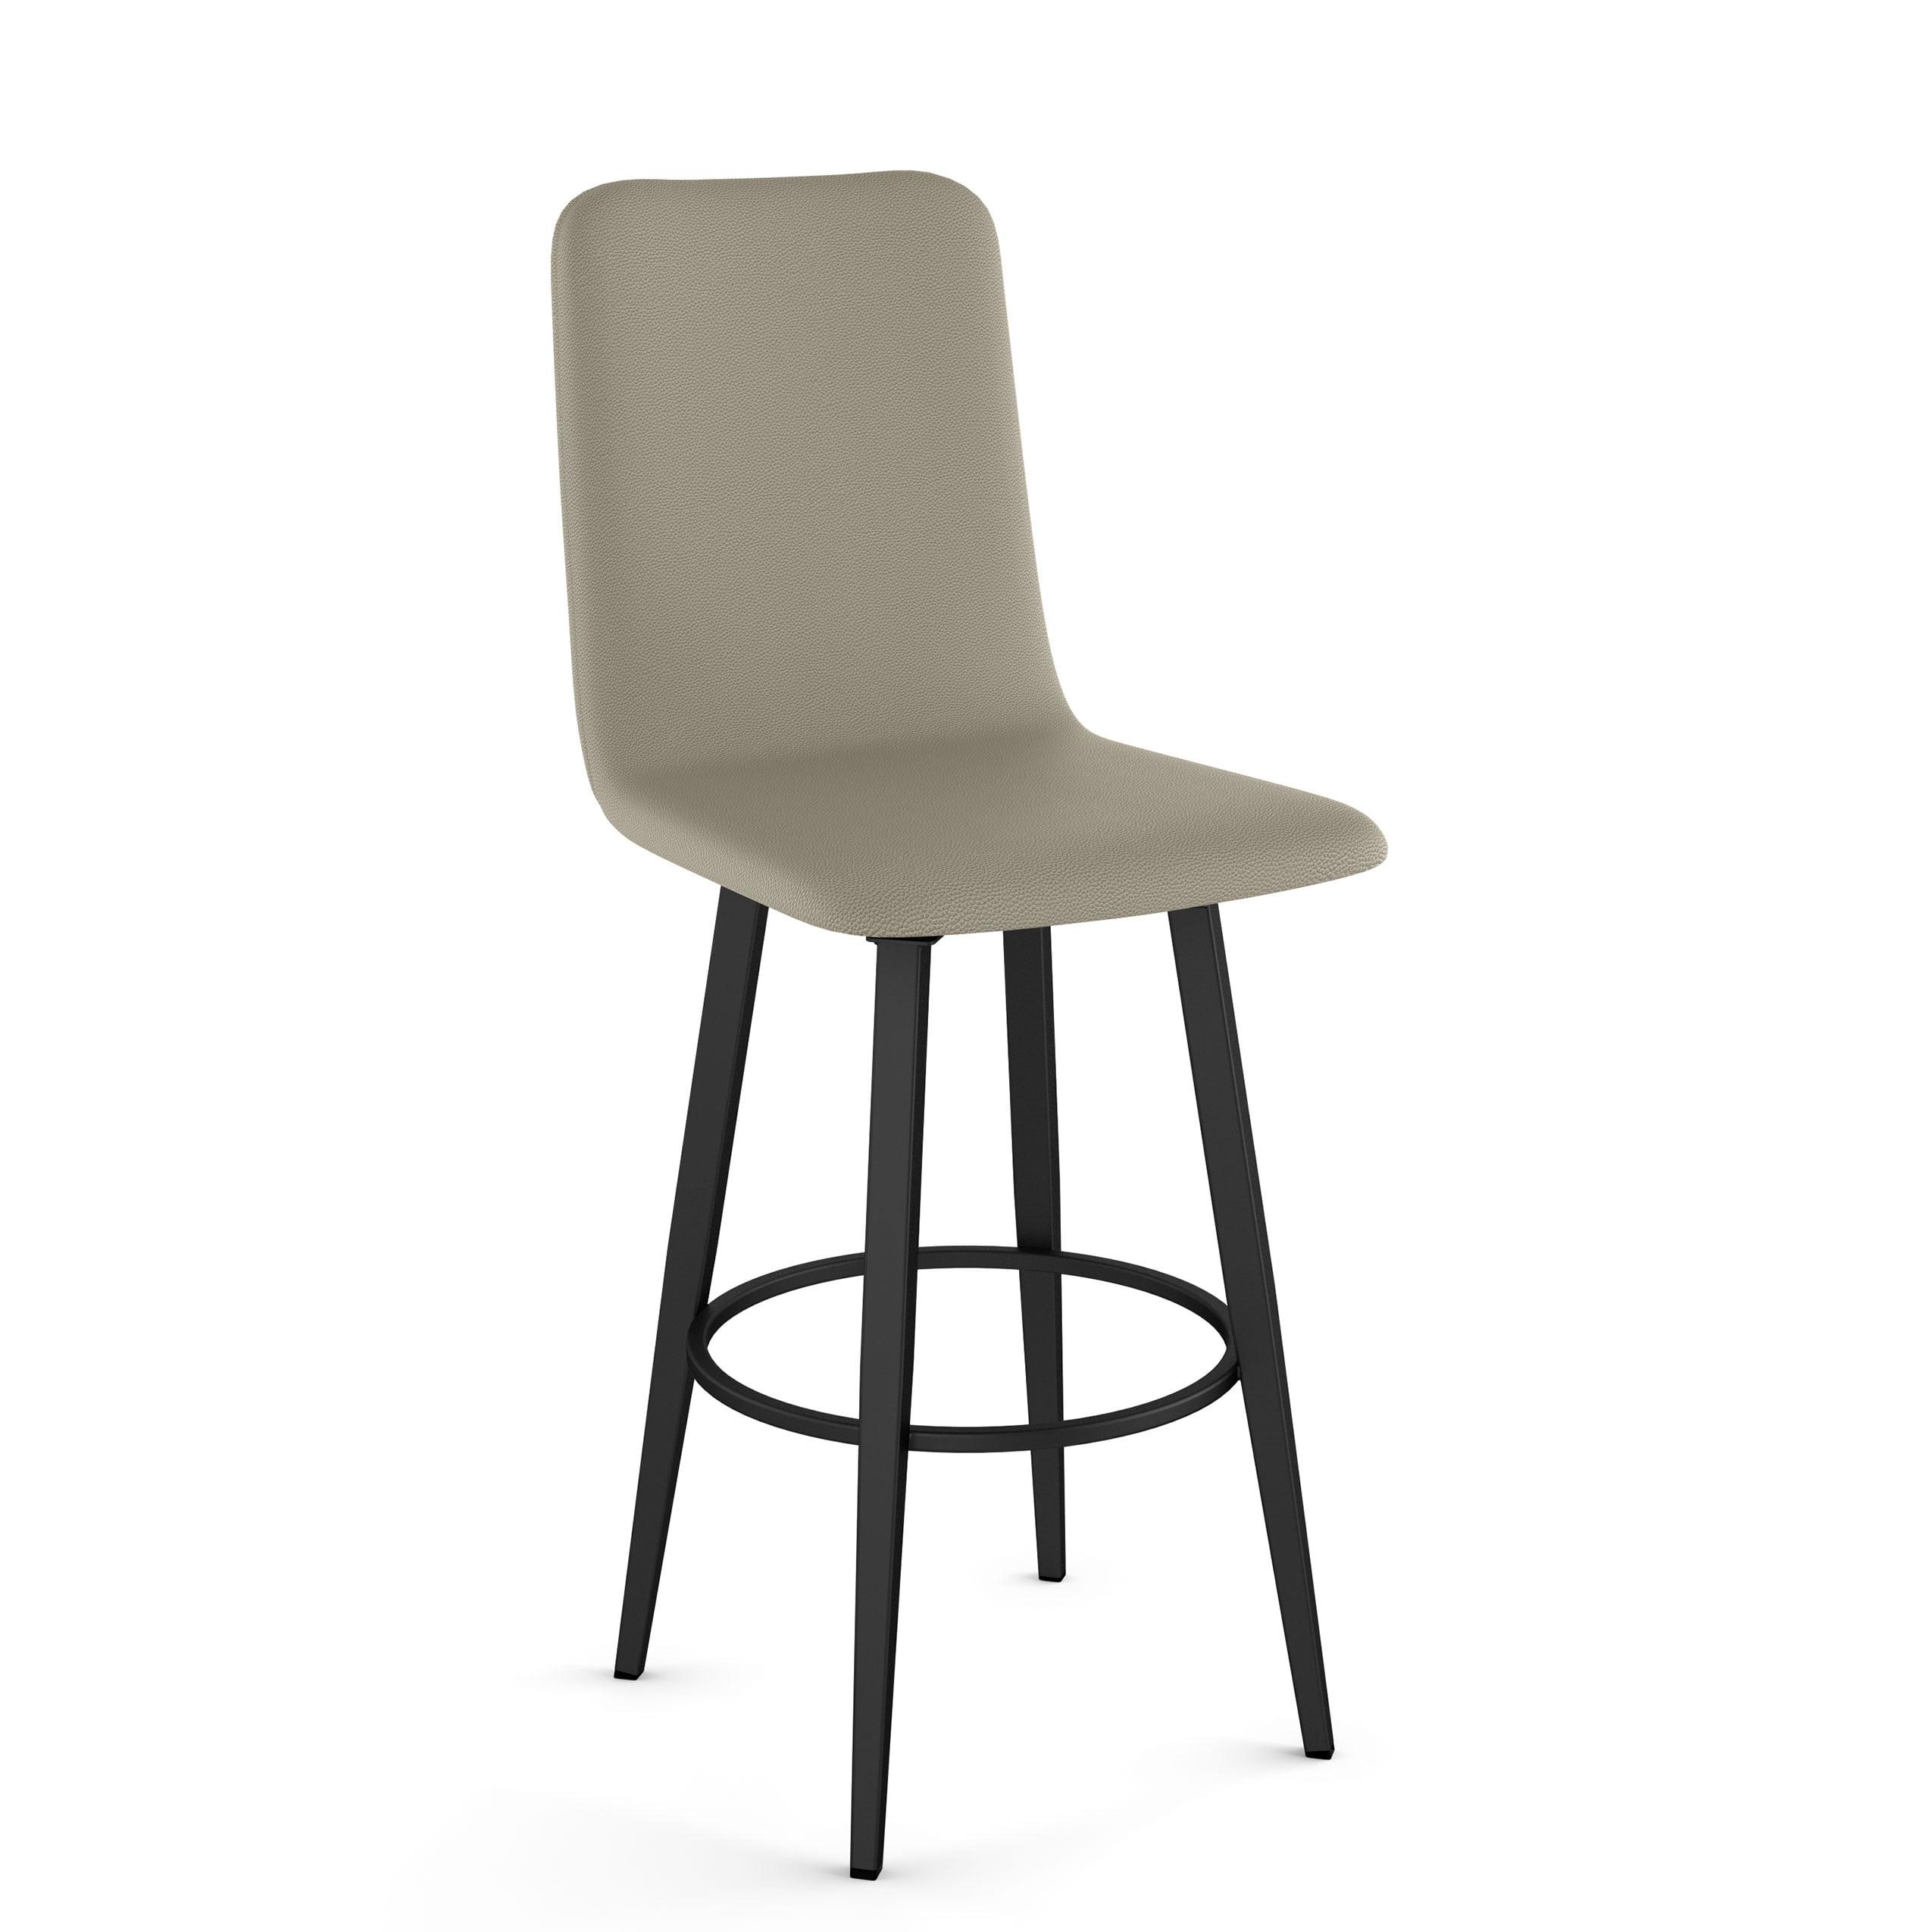 Greige Faux Leather Swivel Bar Stool with Black Metal Frame